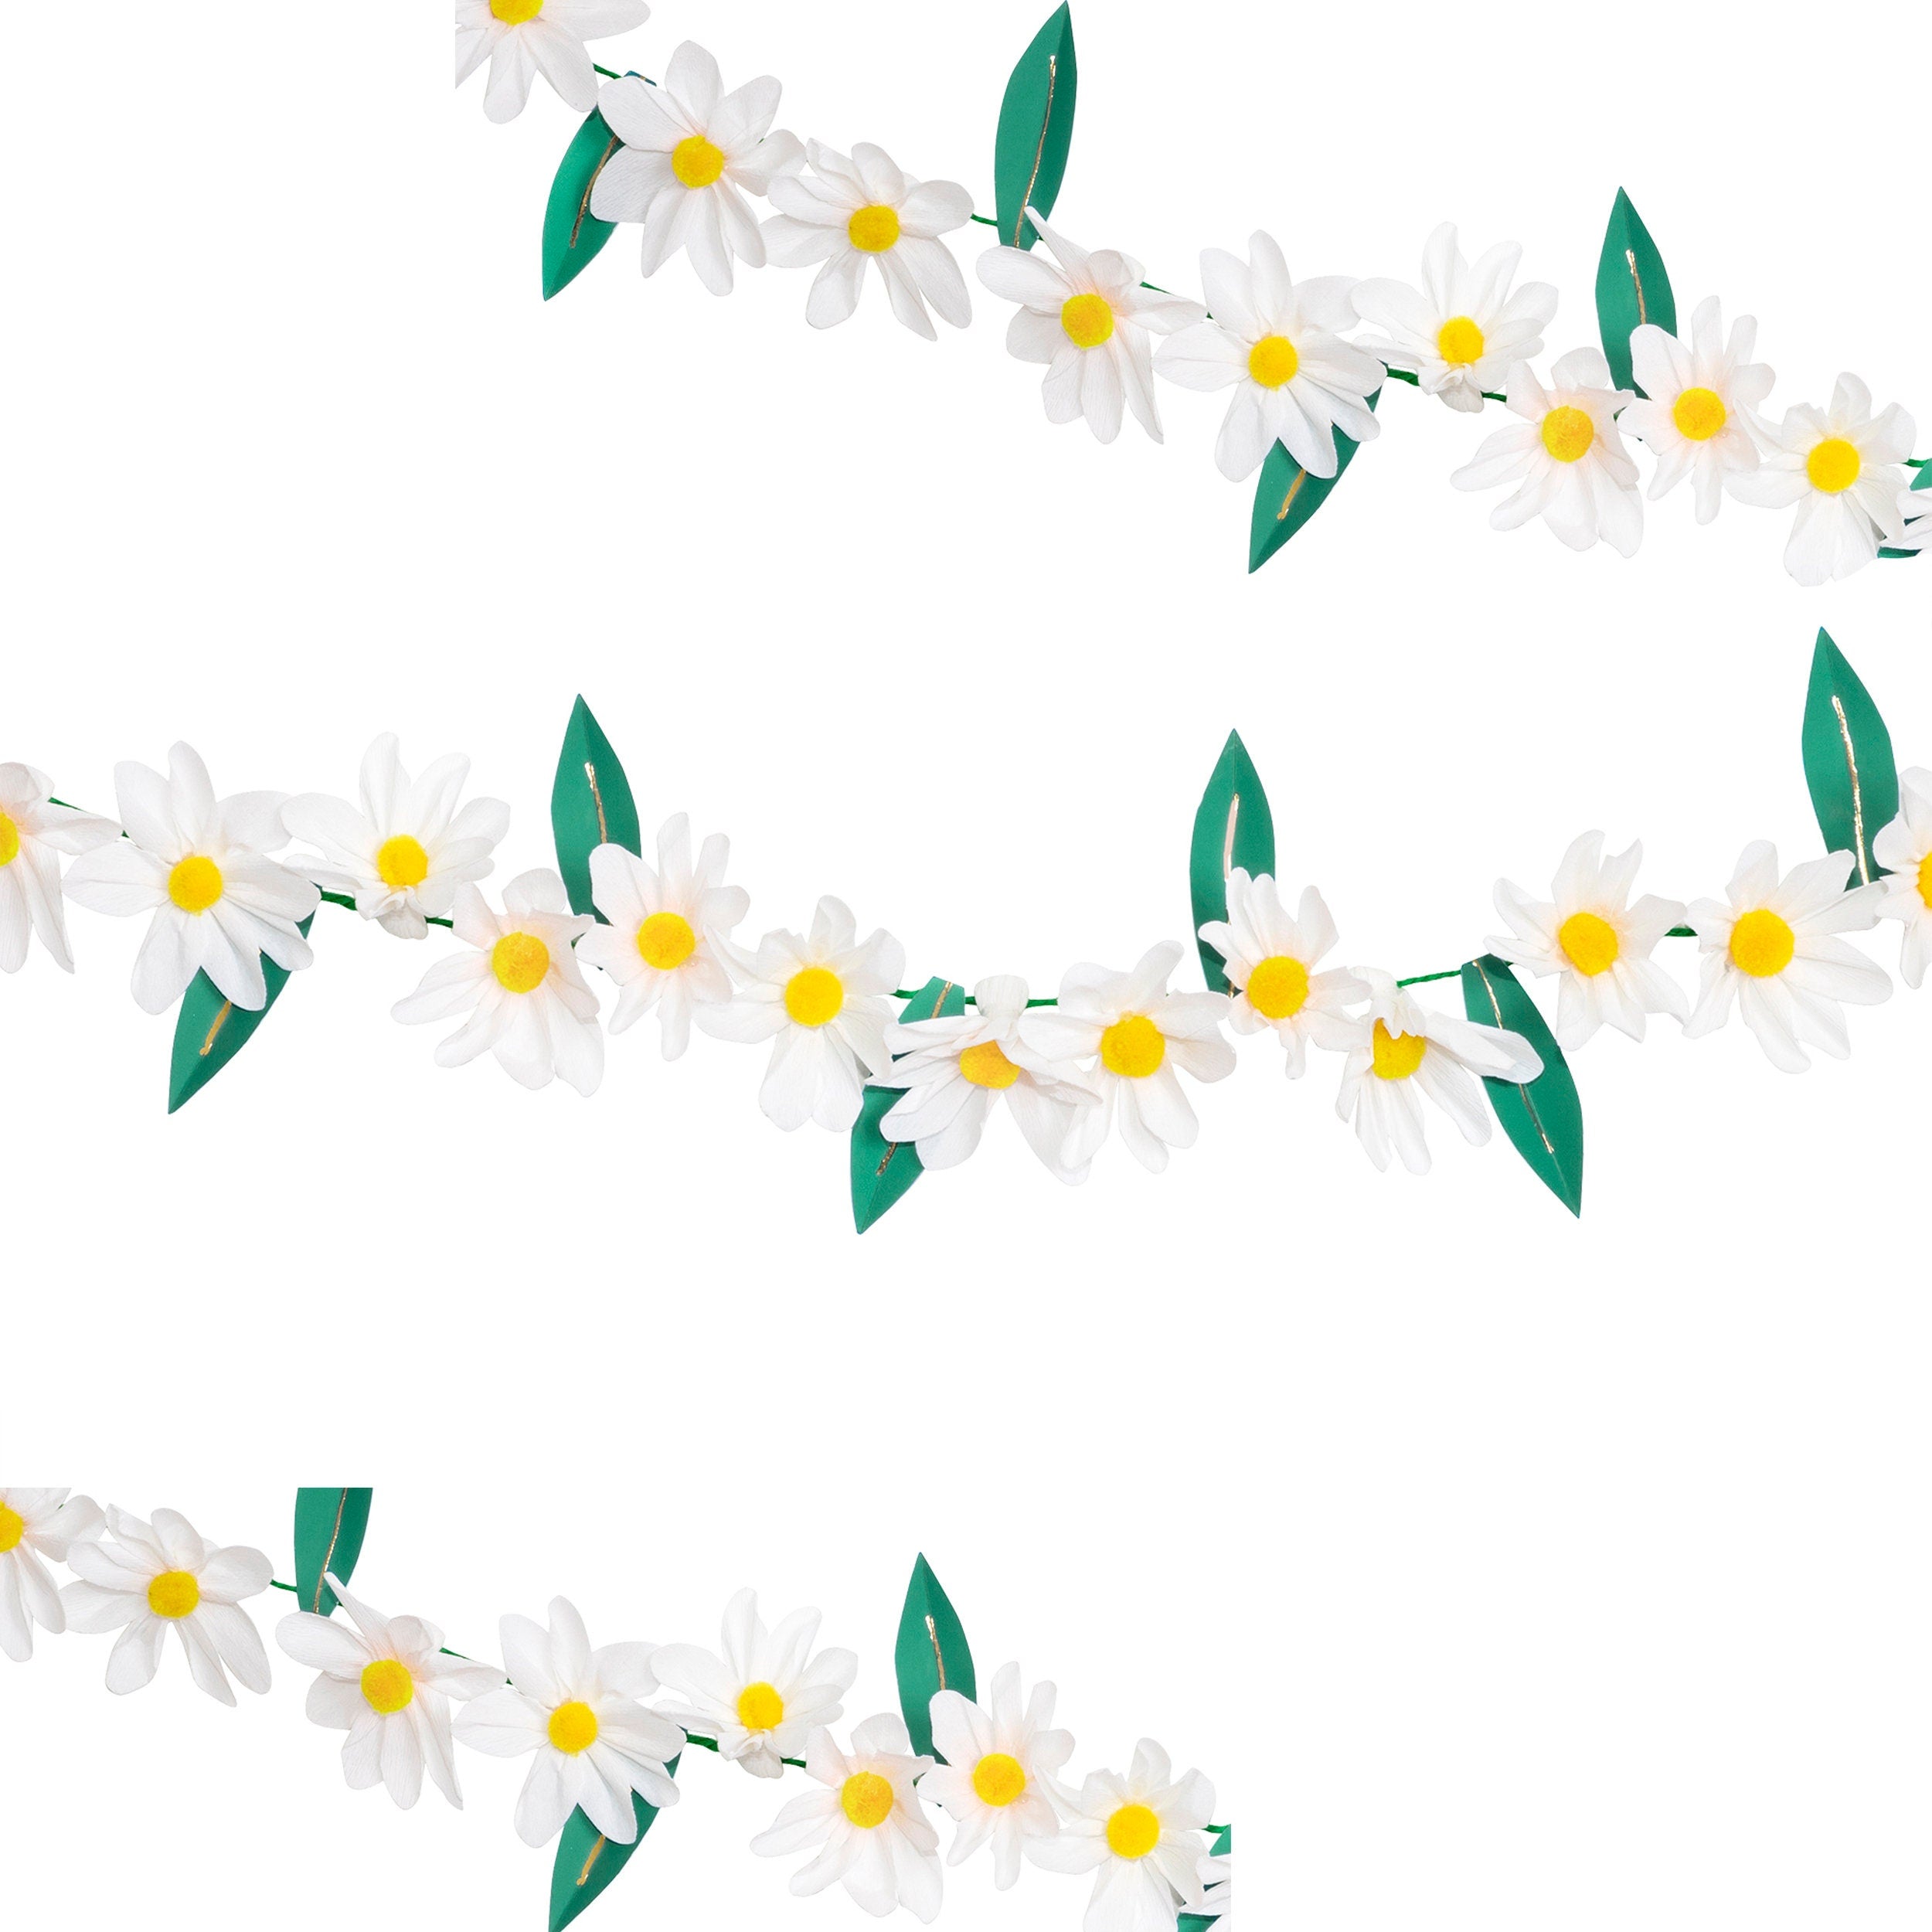 Daisy Garland | Floral Garland - Daisy Decorations - Easter Decorations - Mother's Day Decorations - Flower Garland - Crepe Paper Flowers